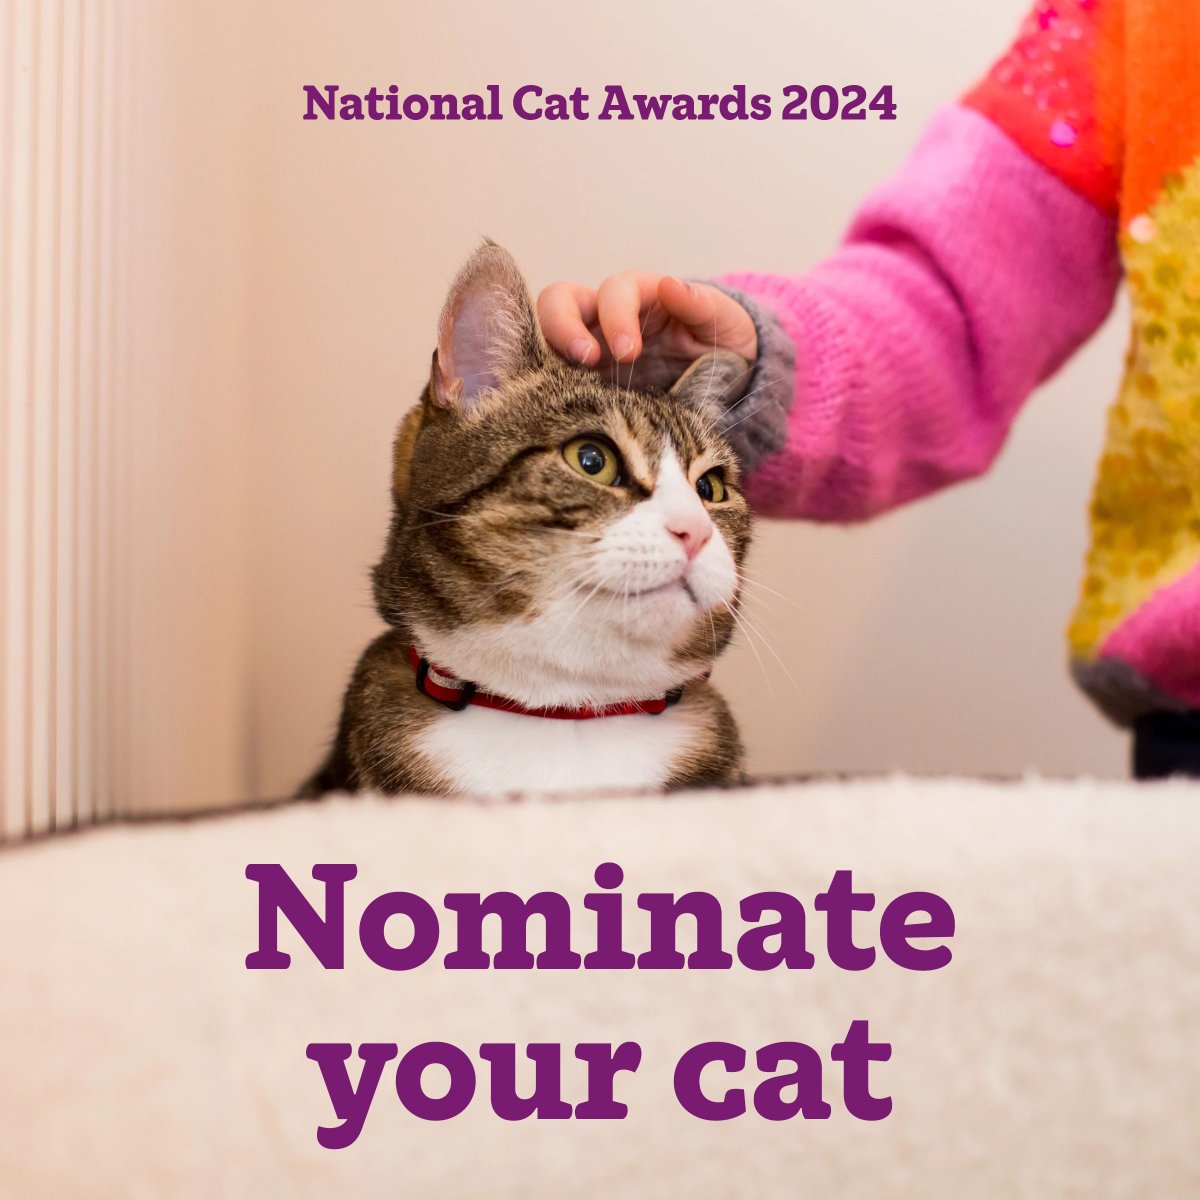 Celebrate your cat companion by entering them into the #NationalCatAwards! Has your cat miraculously survived against the odds, do they bring joy to people on social media, or maybe they've supported your family through a trying time? Nominate your cat: spr.ly/NCAsEntryX